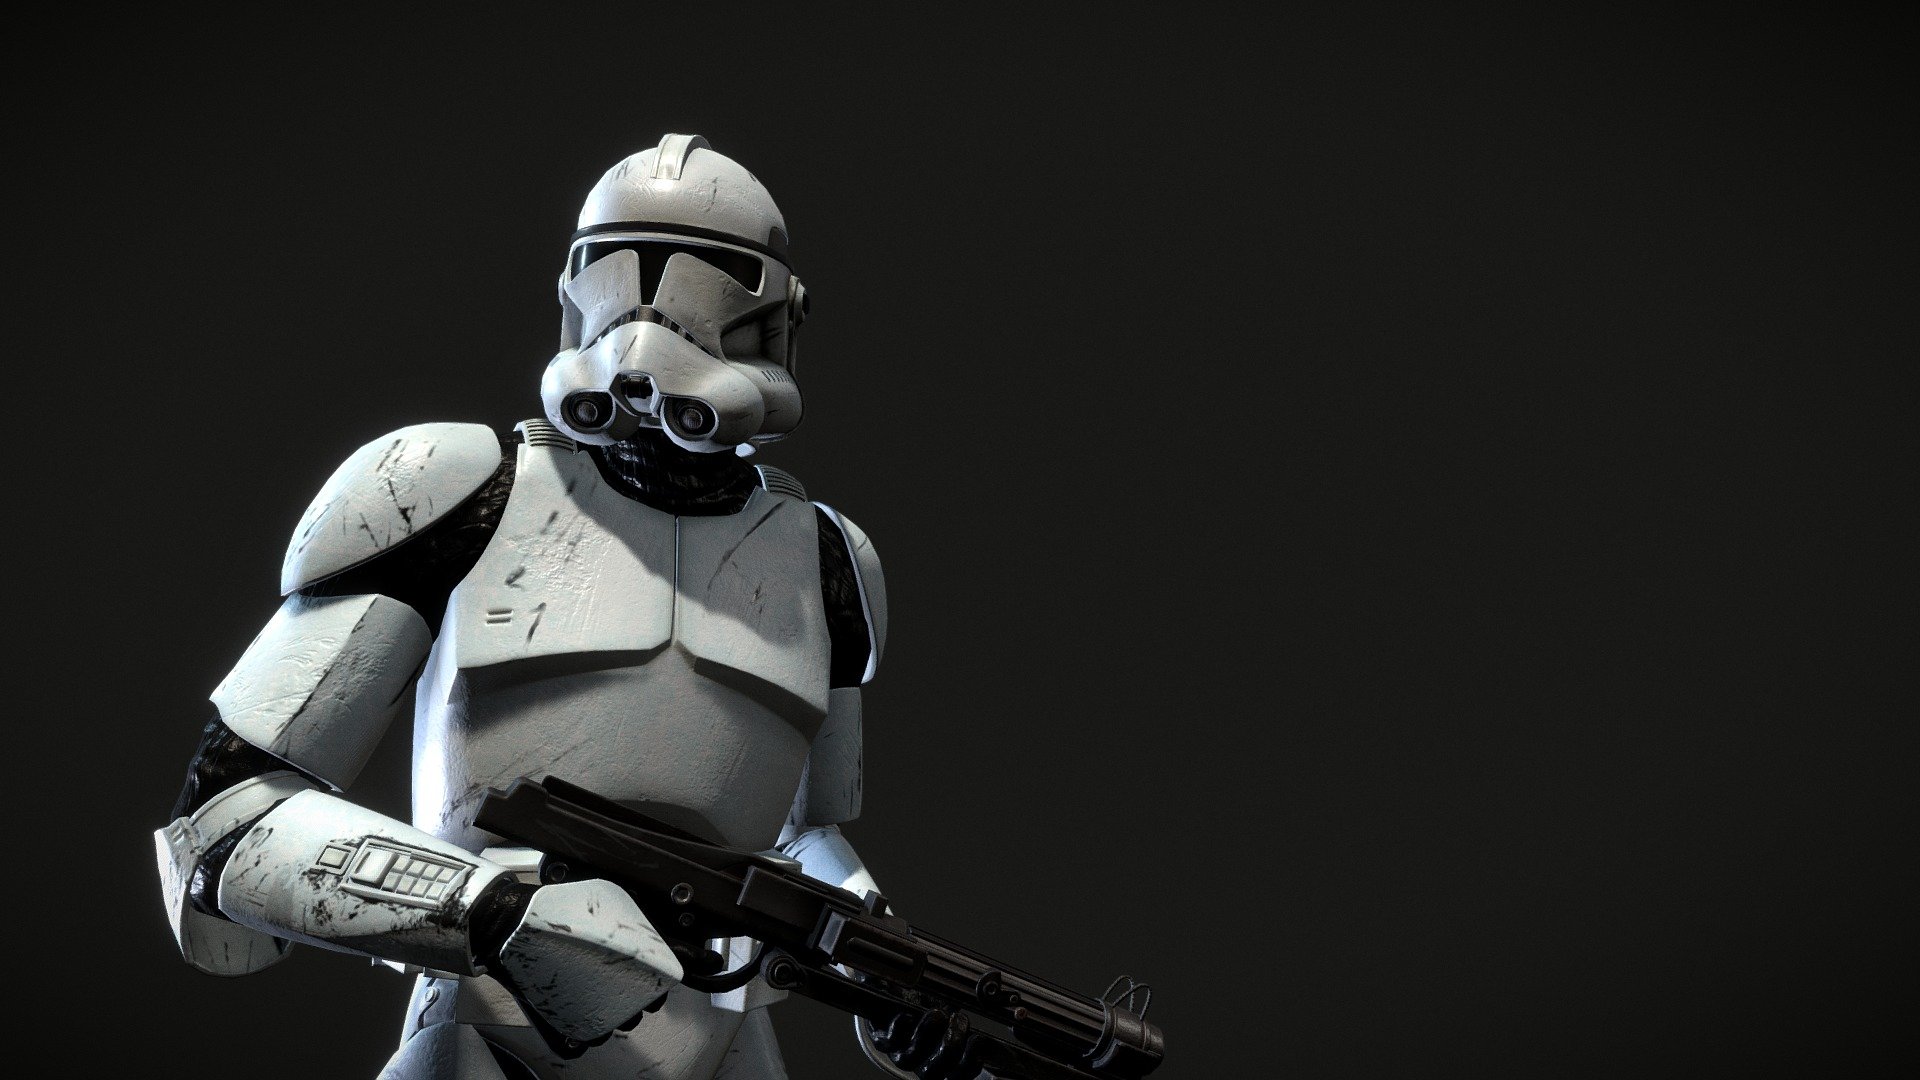 &ldquo;Not a shiny anymore! Regular trooper ready for your mission!